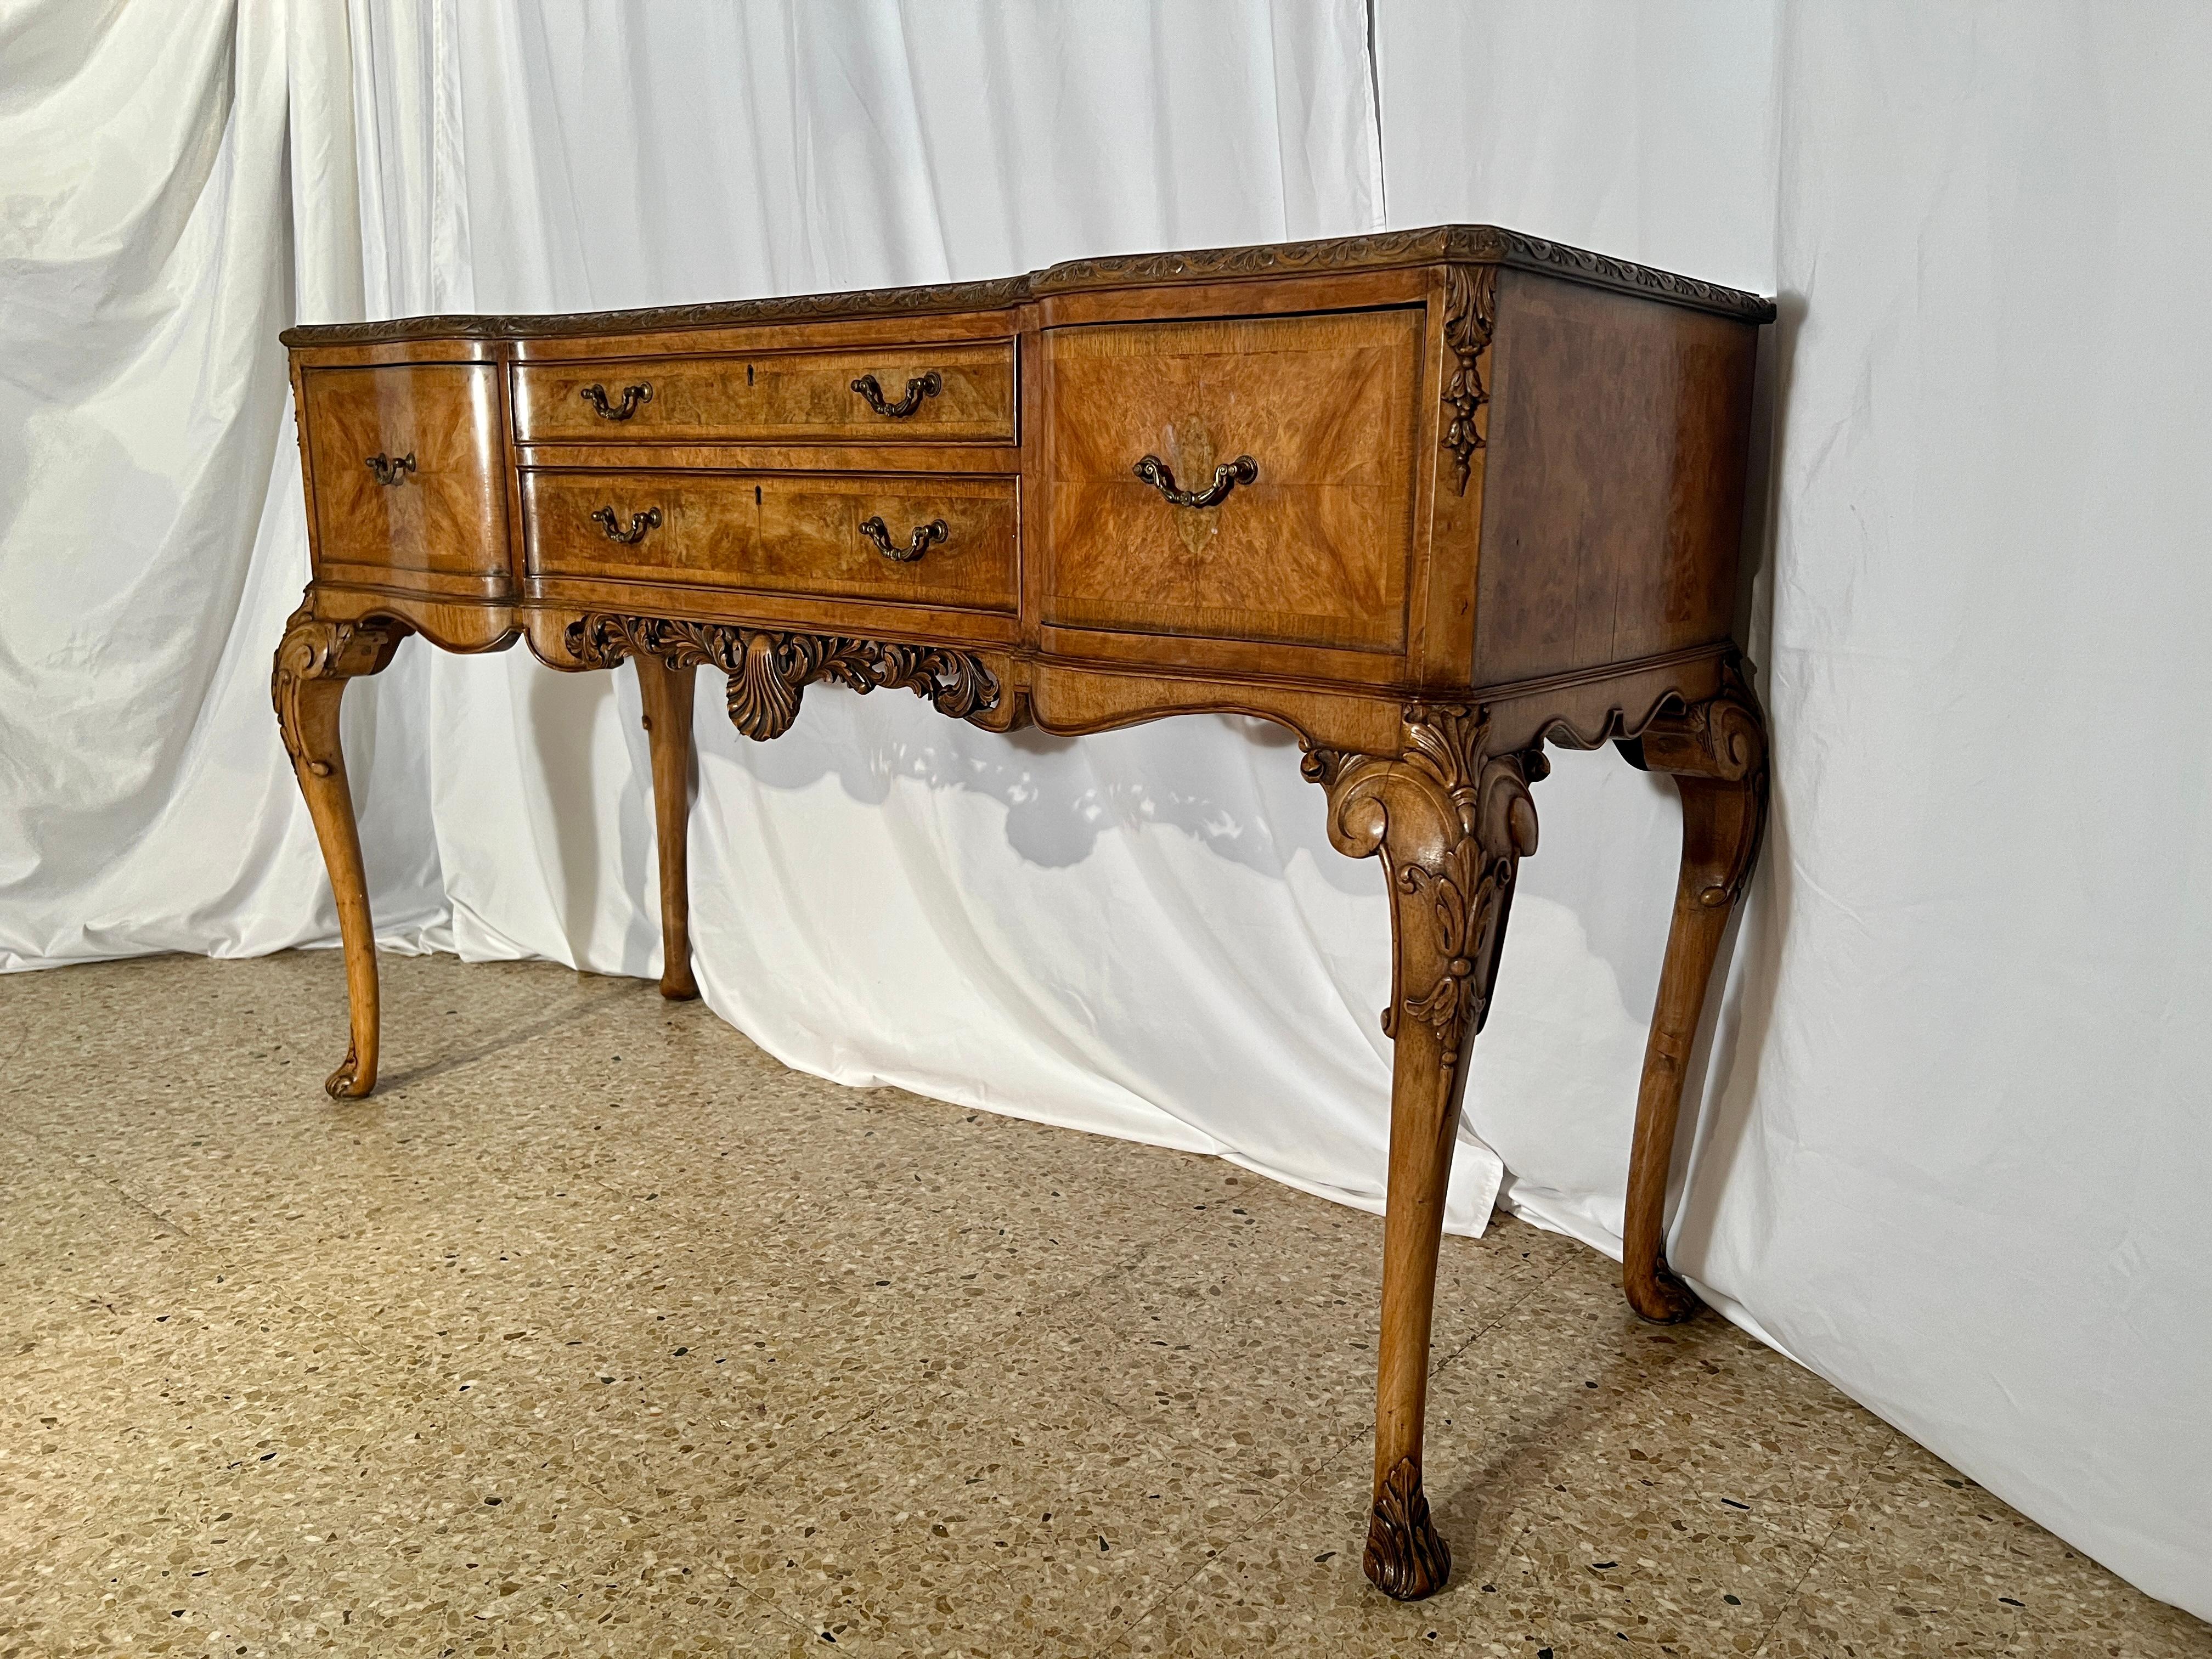 Silver Plate Antique English Burled Walnut Silver Chest on Legs with Flatware, Circa 1900. For Sale